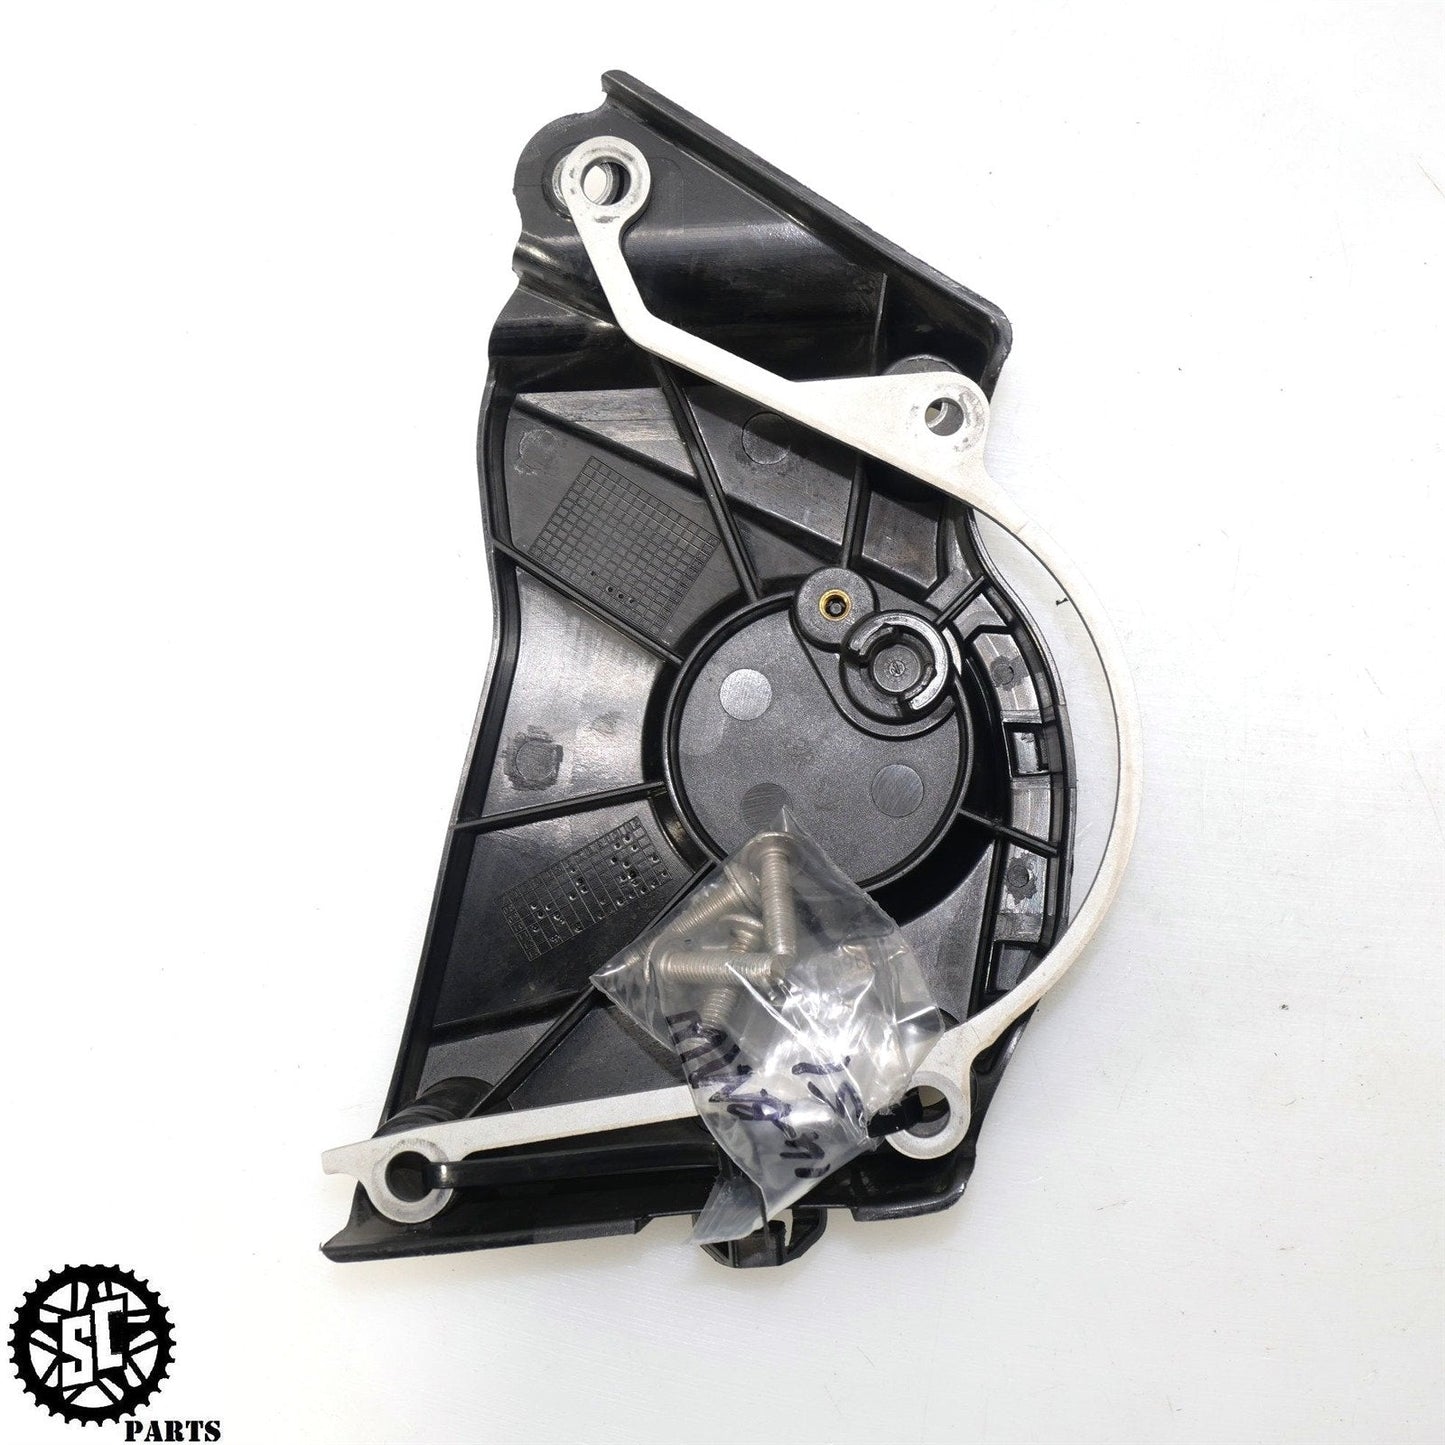 2010-2014 BMW S1000RR FRONT SPROCKET COVER B22